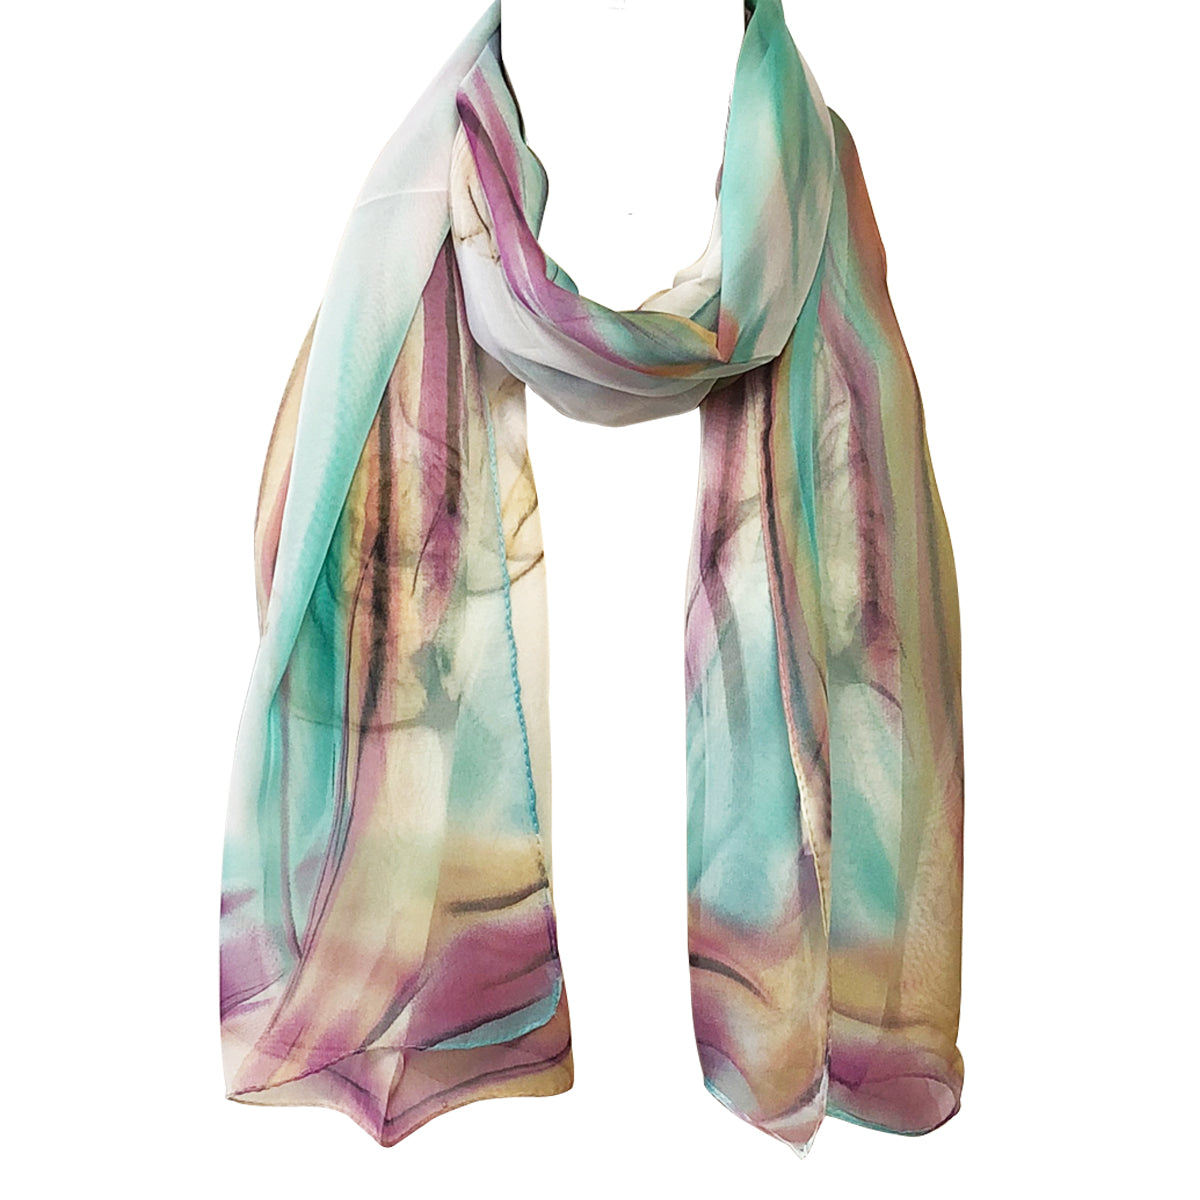 Women's Super soft Lightweight Abstract Sheer Silk Scarf - Hot Pink Floral  - CM11LHF08W9 - Scarves & Wraps, Fashion Scarve…